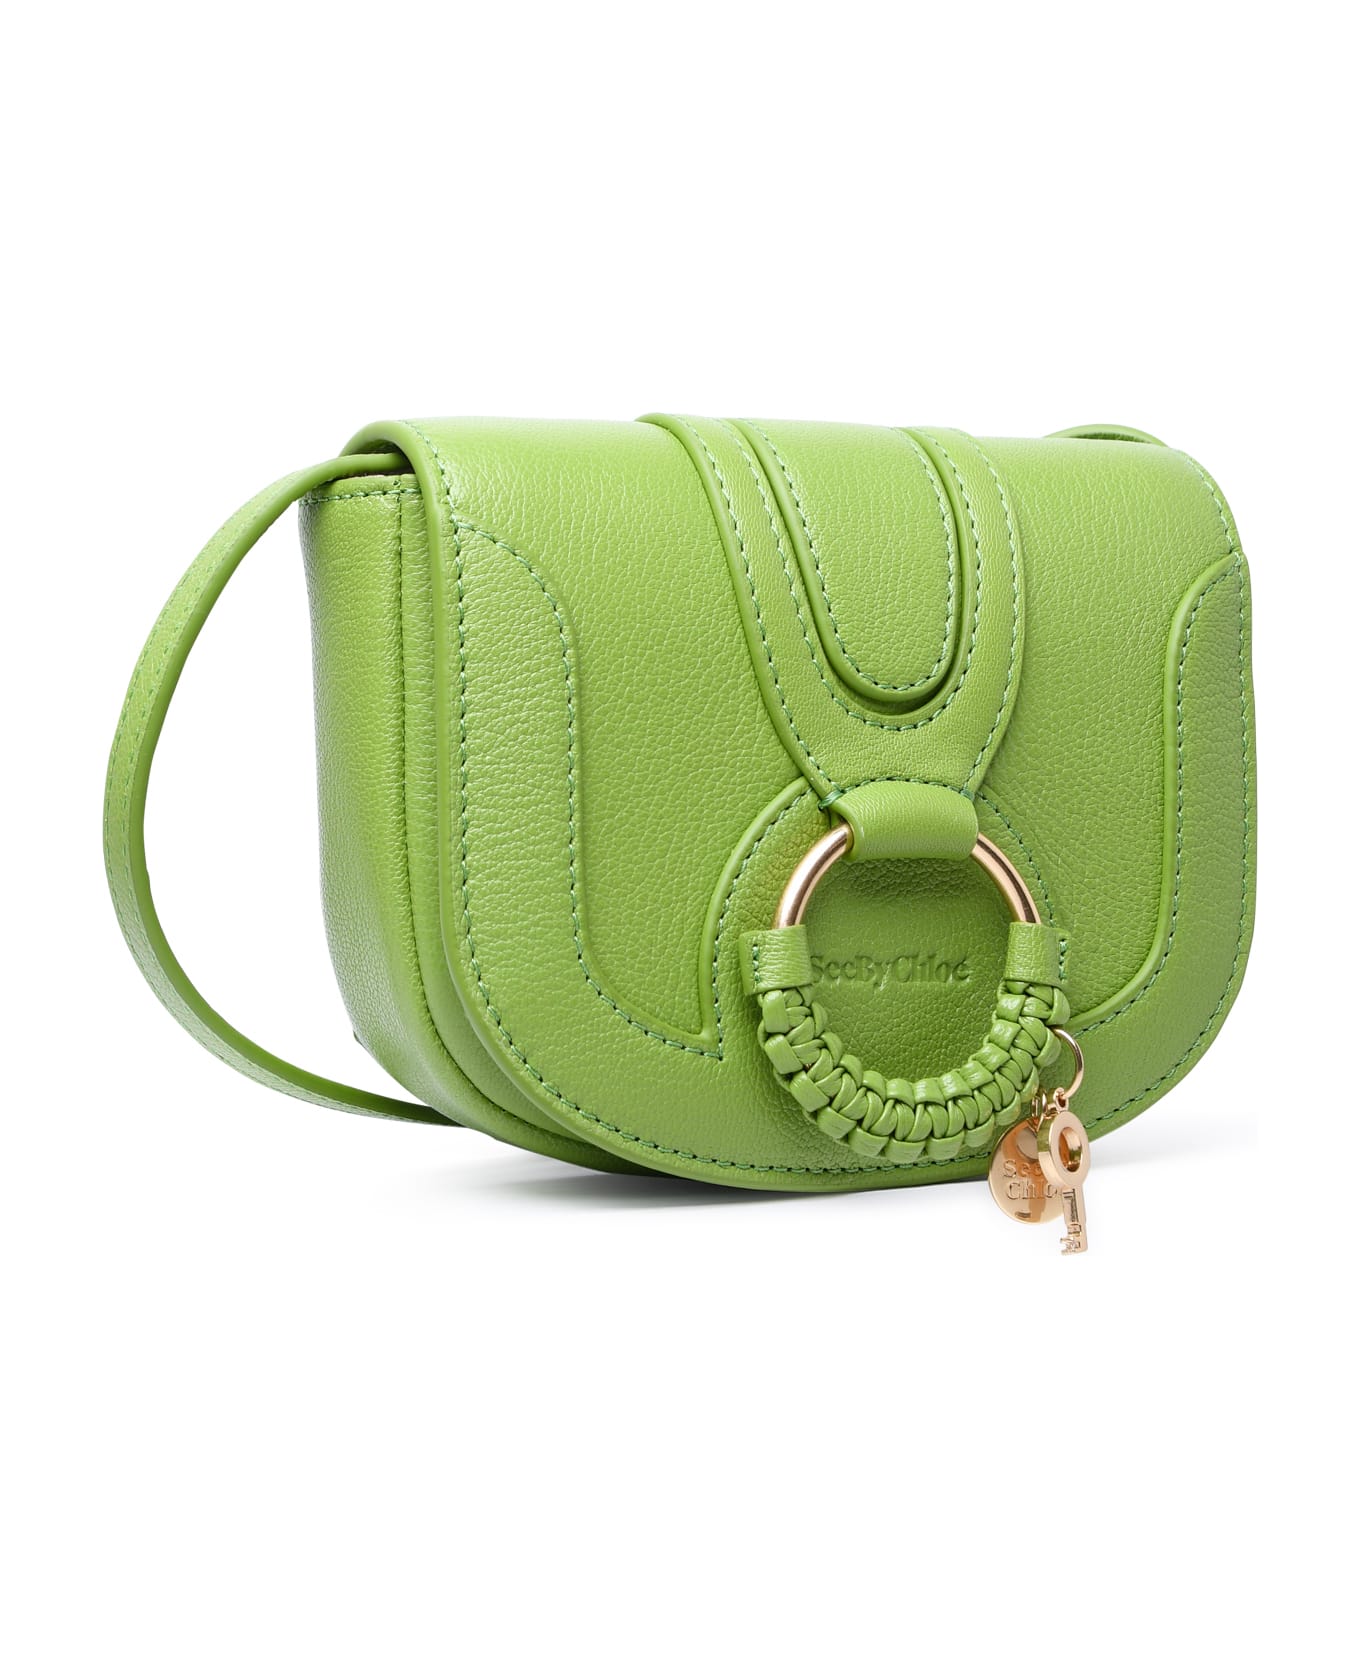 See by Chloé 'hana' Small Green Leather Bag - Green トートバッグ